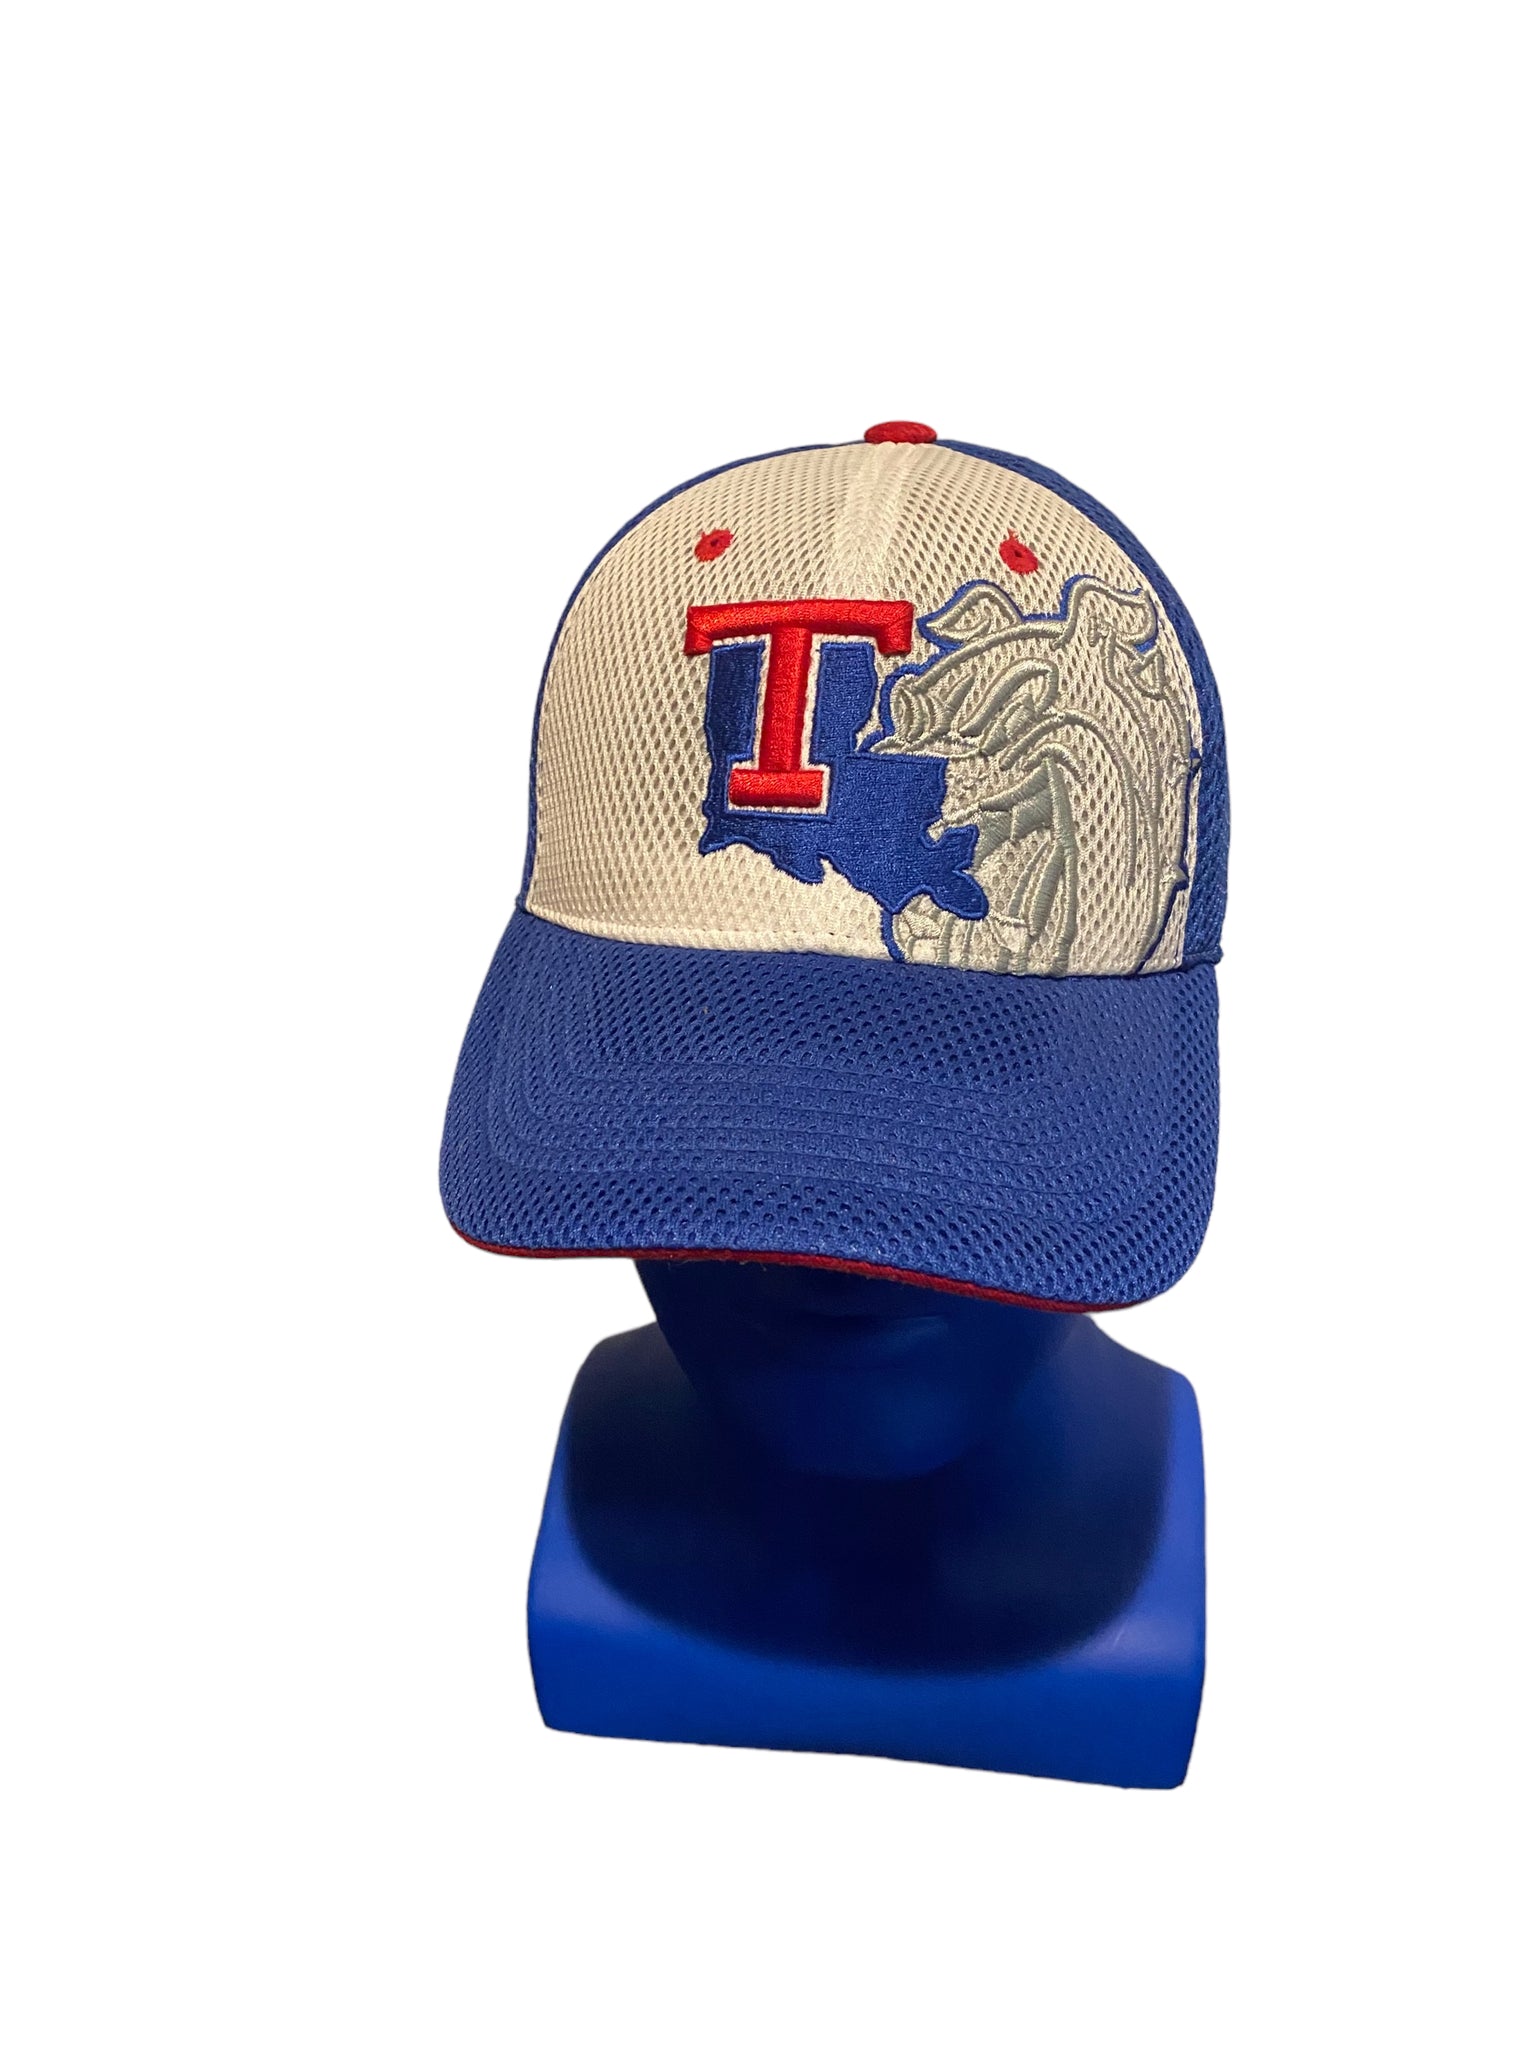 top of the world hat Louisiana tech buldogs logo on front and back Fitted Osfa